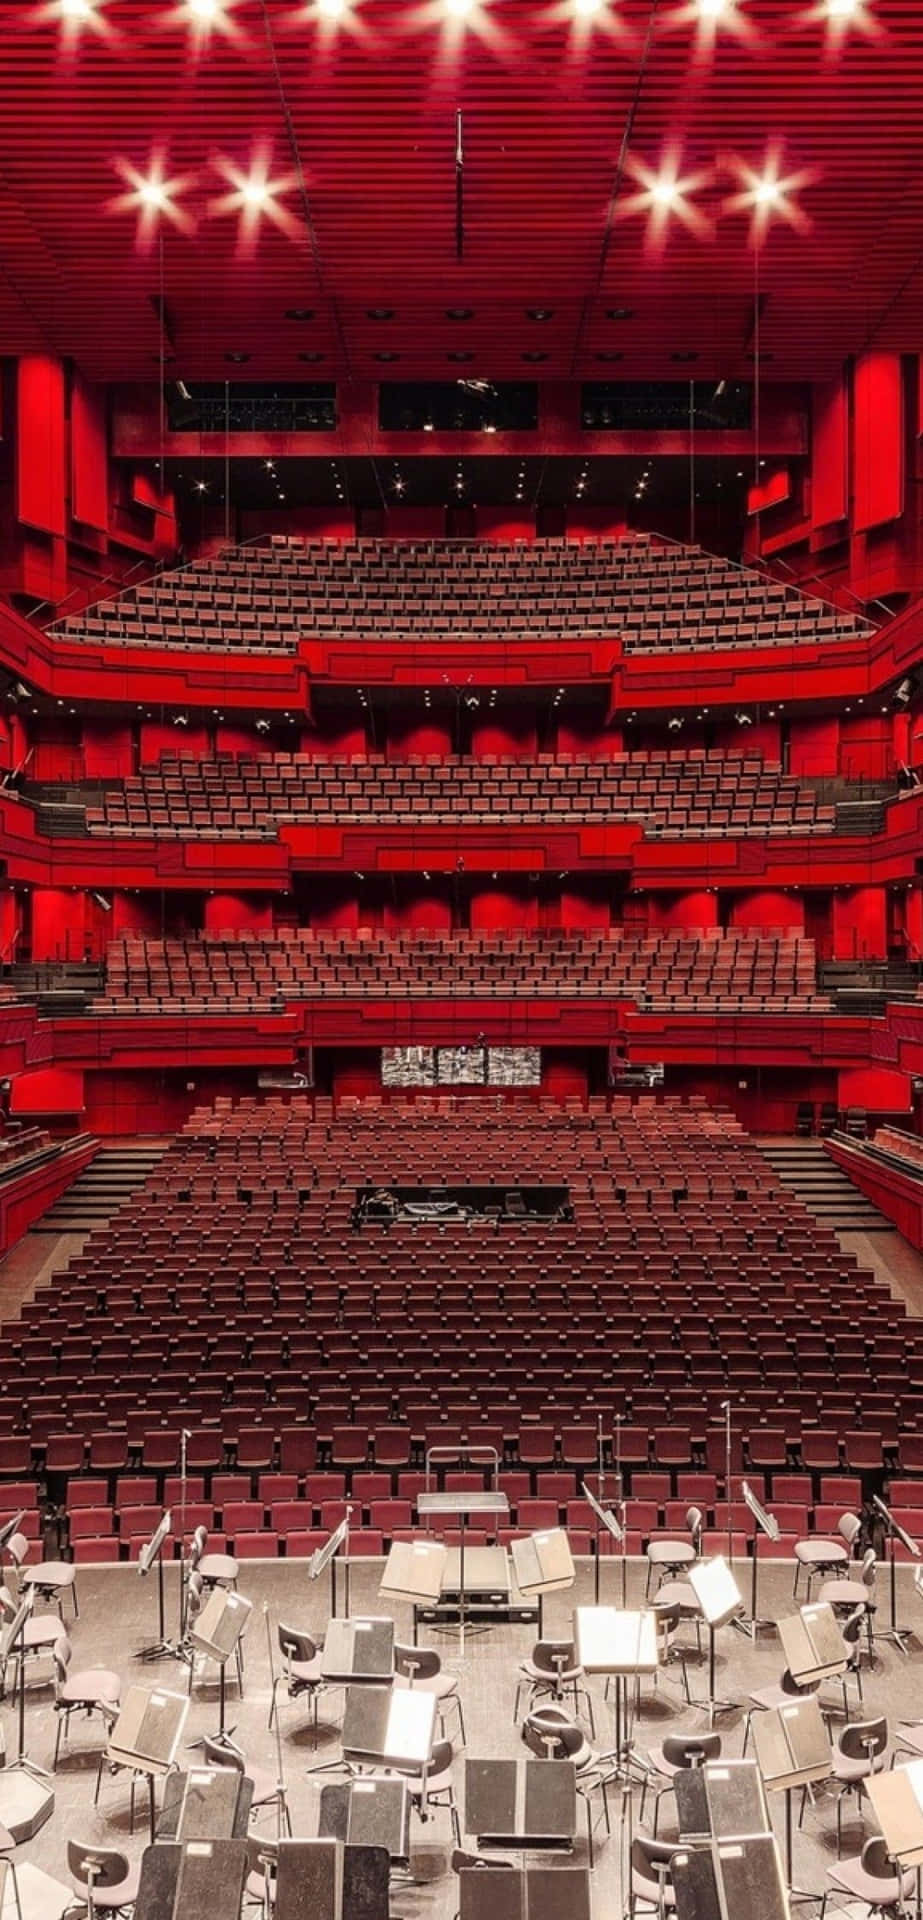 A Large Auditorium With Red Seats And Chairs